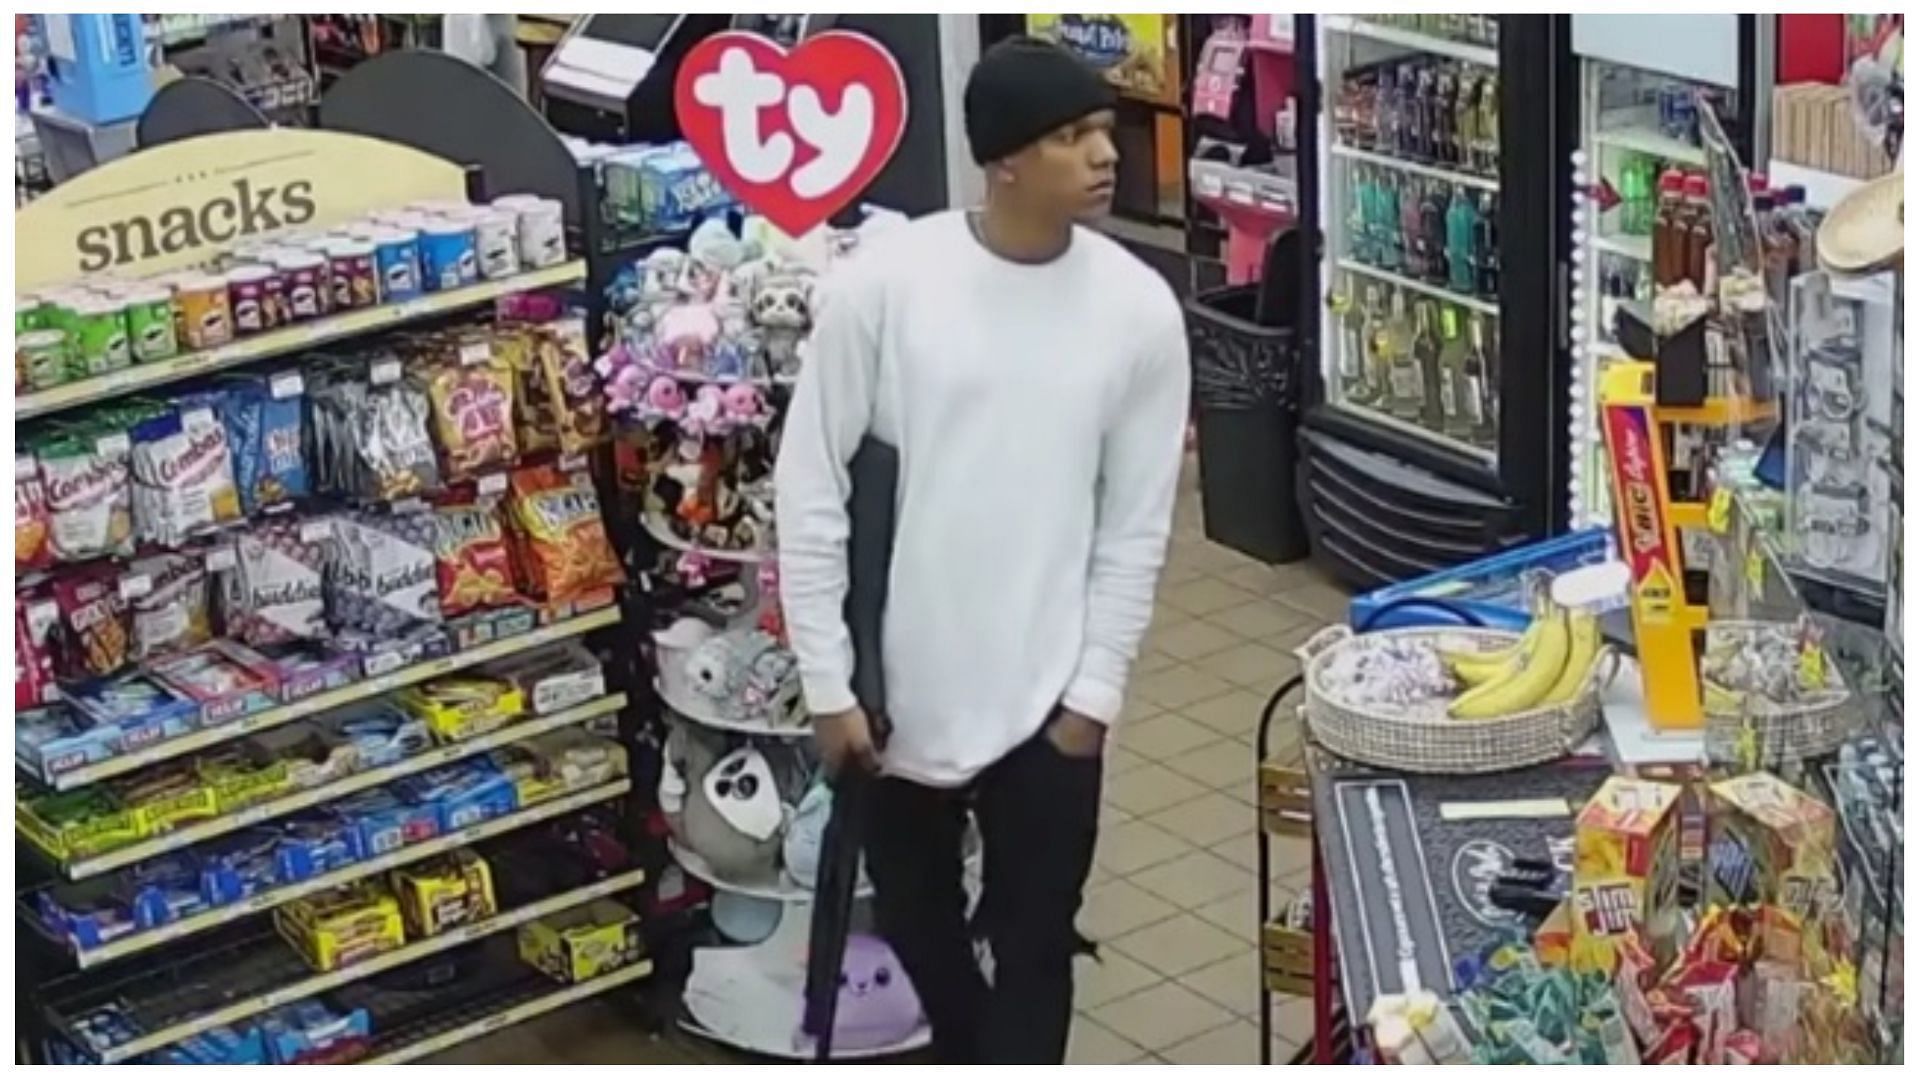 A Chicago armed robber casually walking into Florida convenience store (Image via Escambia County Sheriff